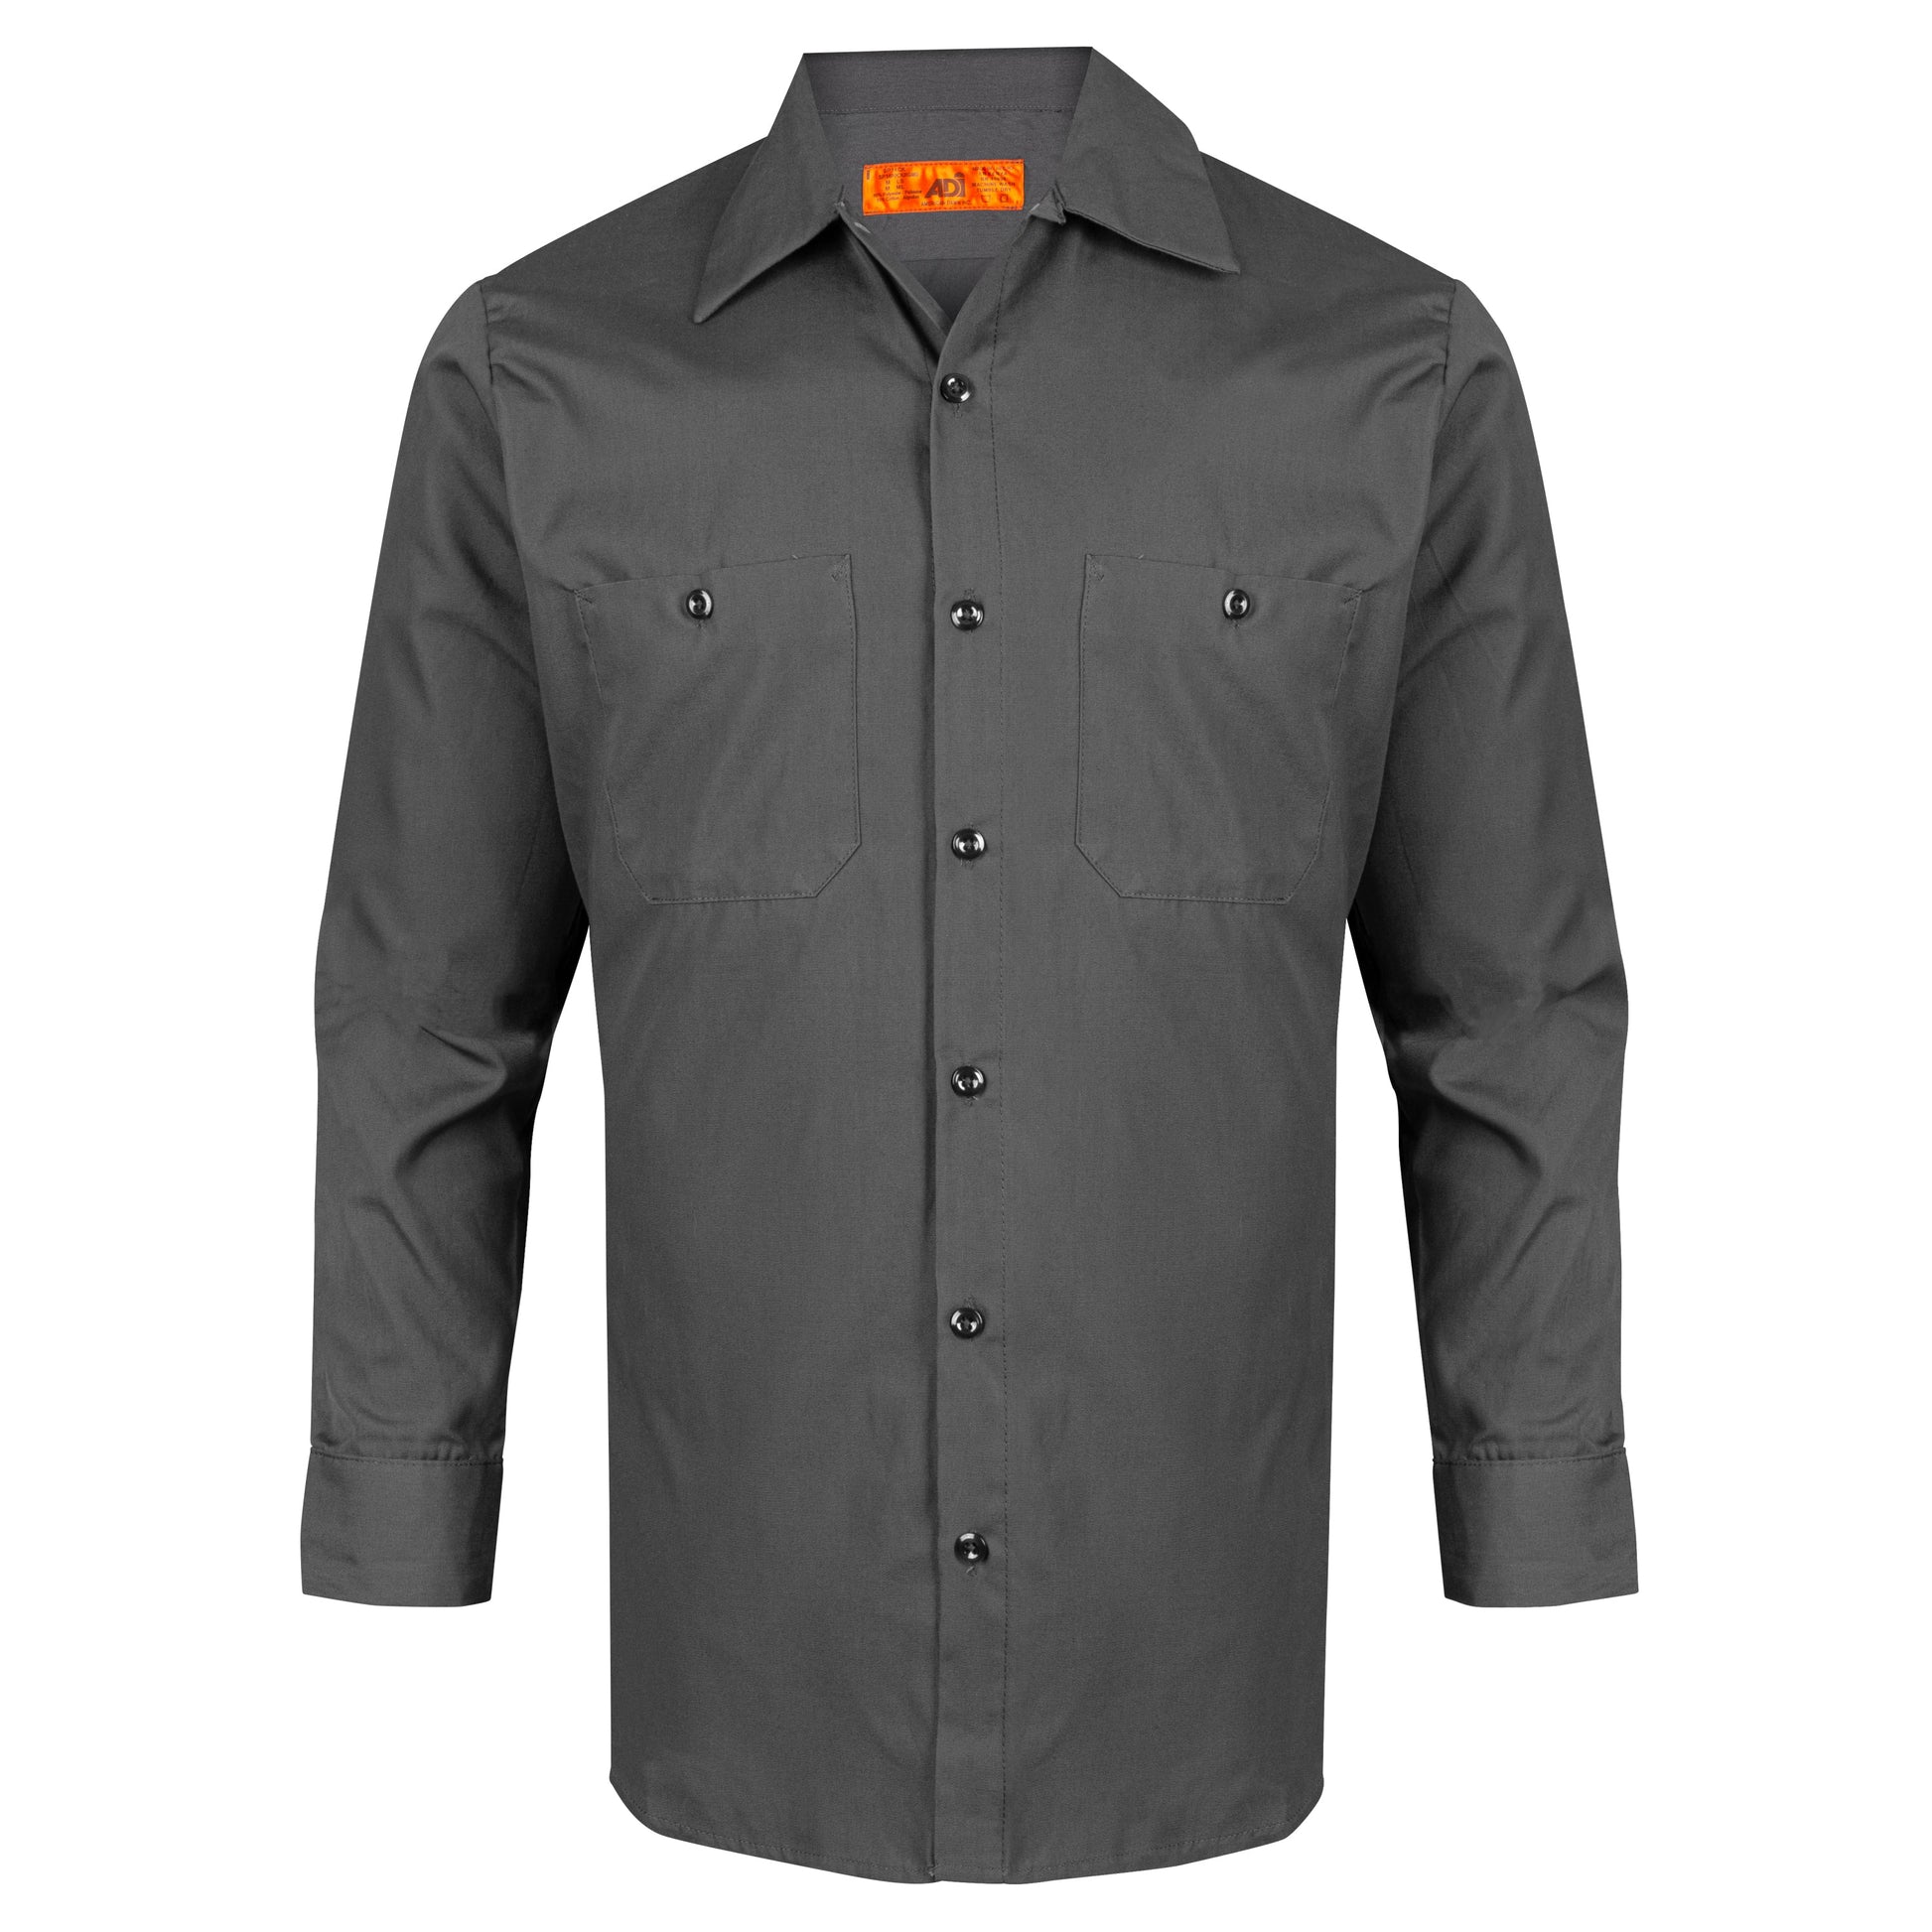 American Dawn | 2X-Large Charcoal Work Shirt With Long Sleeves And 2 Pockets